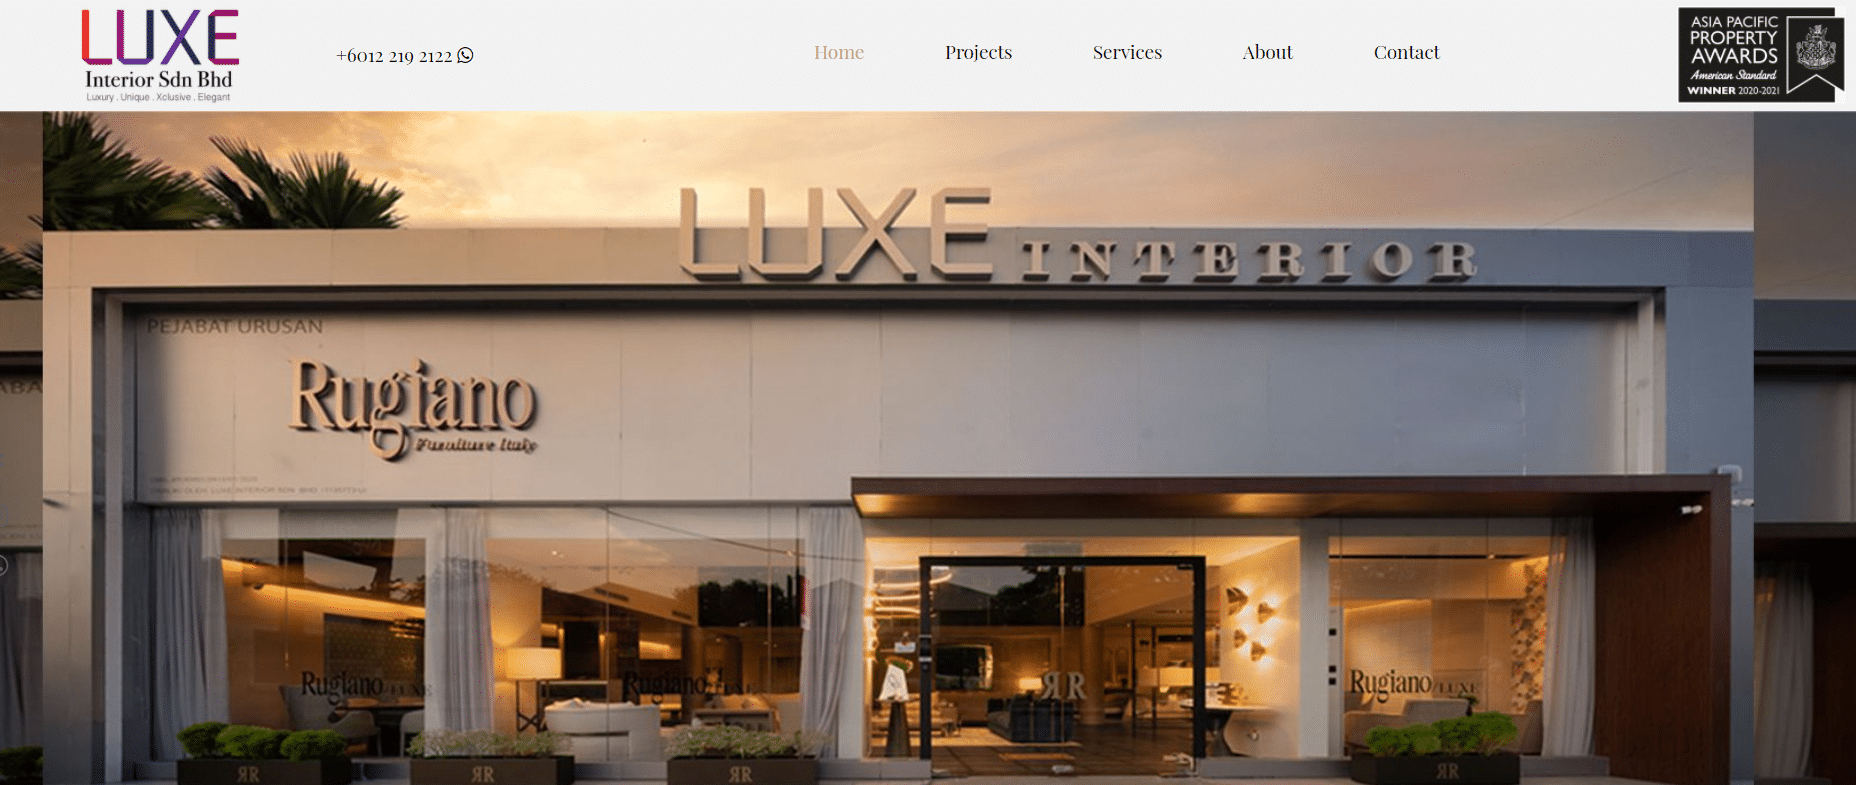 Luxe Interior Sdn Bhd is the Top 10 Best Affordable Interior Designers You Can Hire in Malaysia